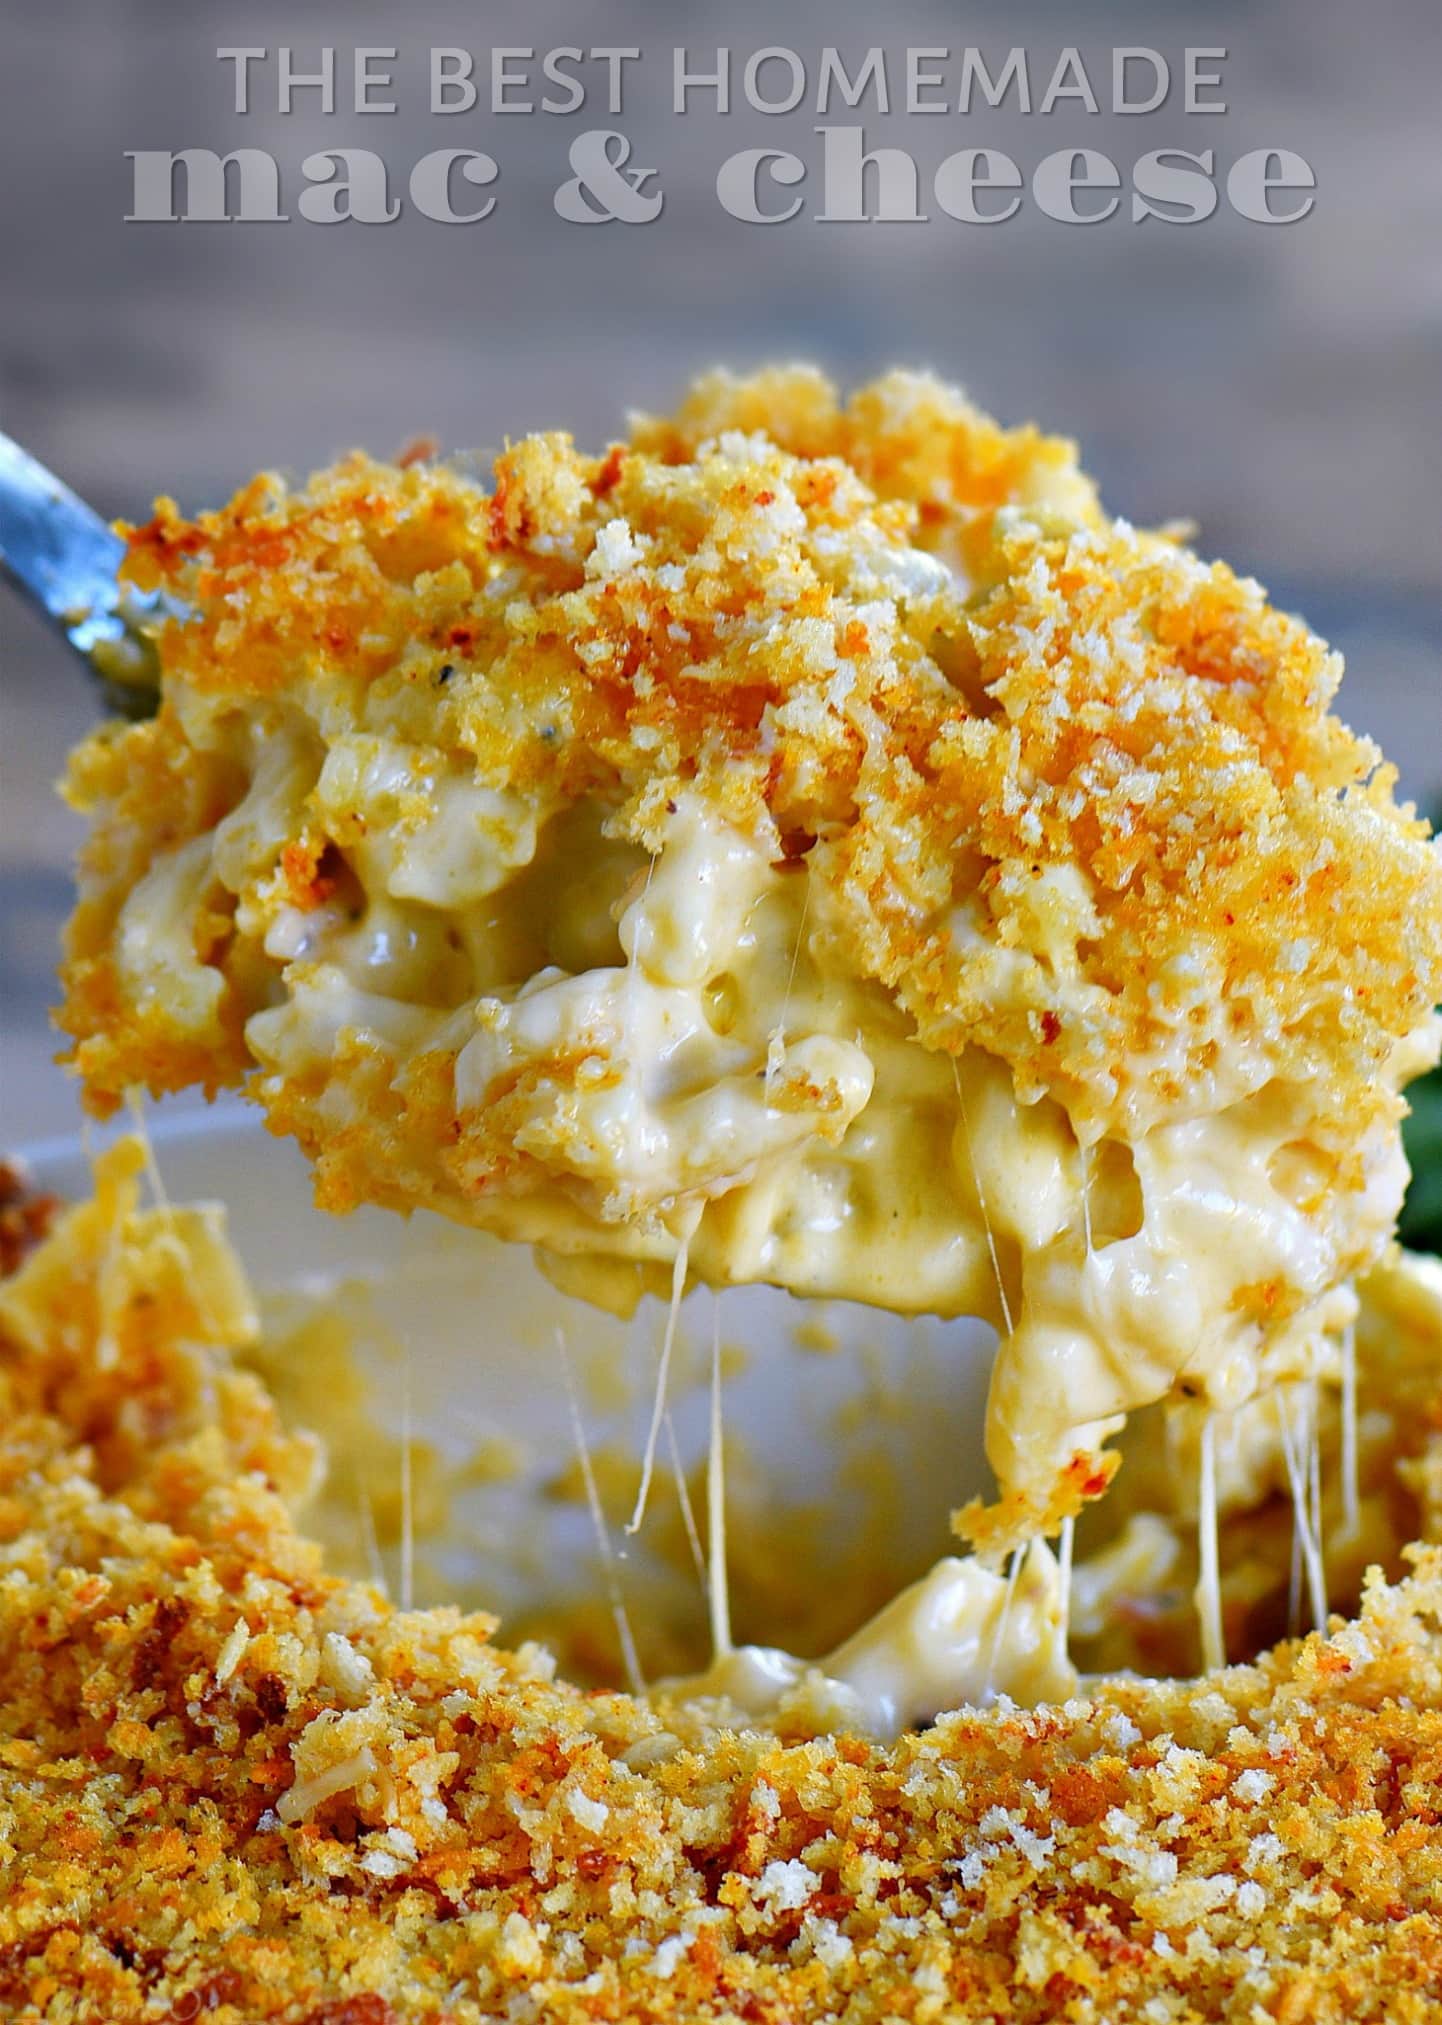 Top 3 Recipes For Mac And Cheese